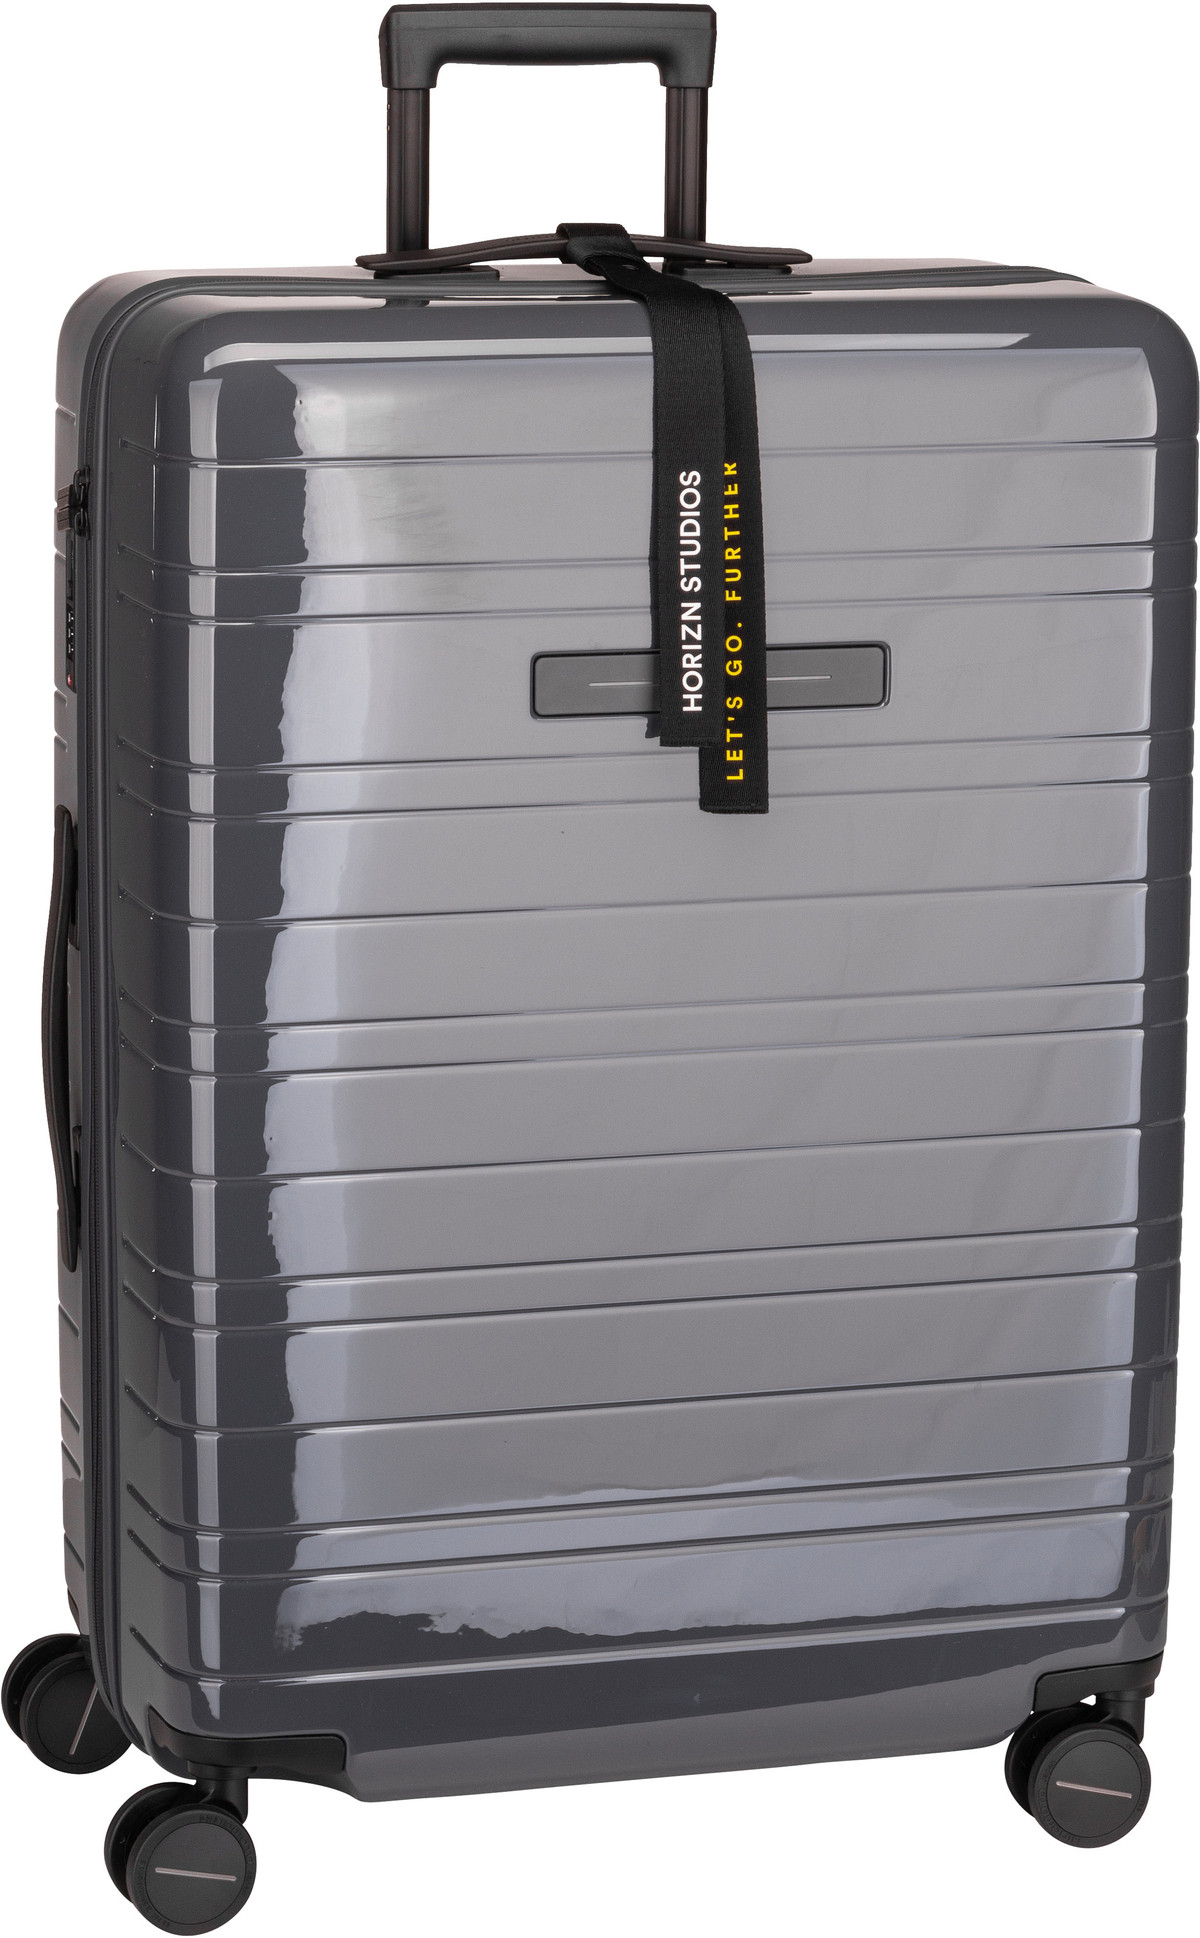 Horizn Studios H7 Essential Check-In Luggage - Glossy Graphite